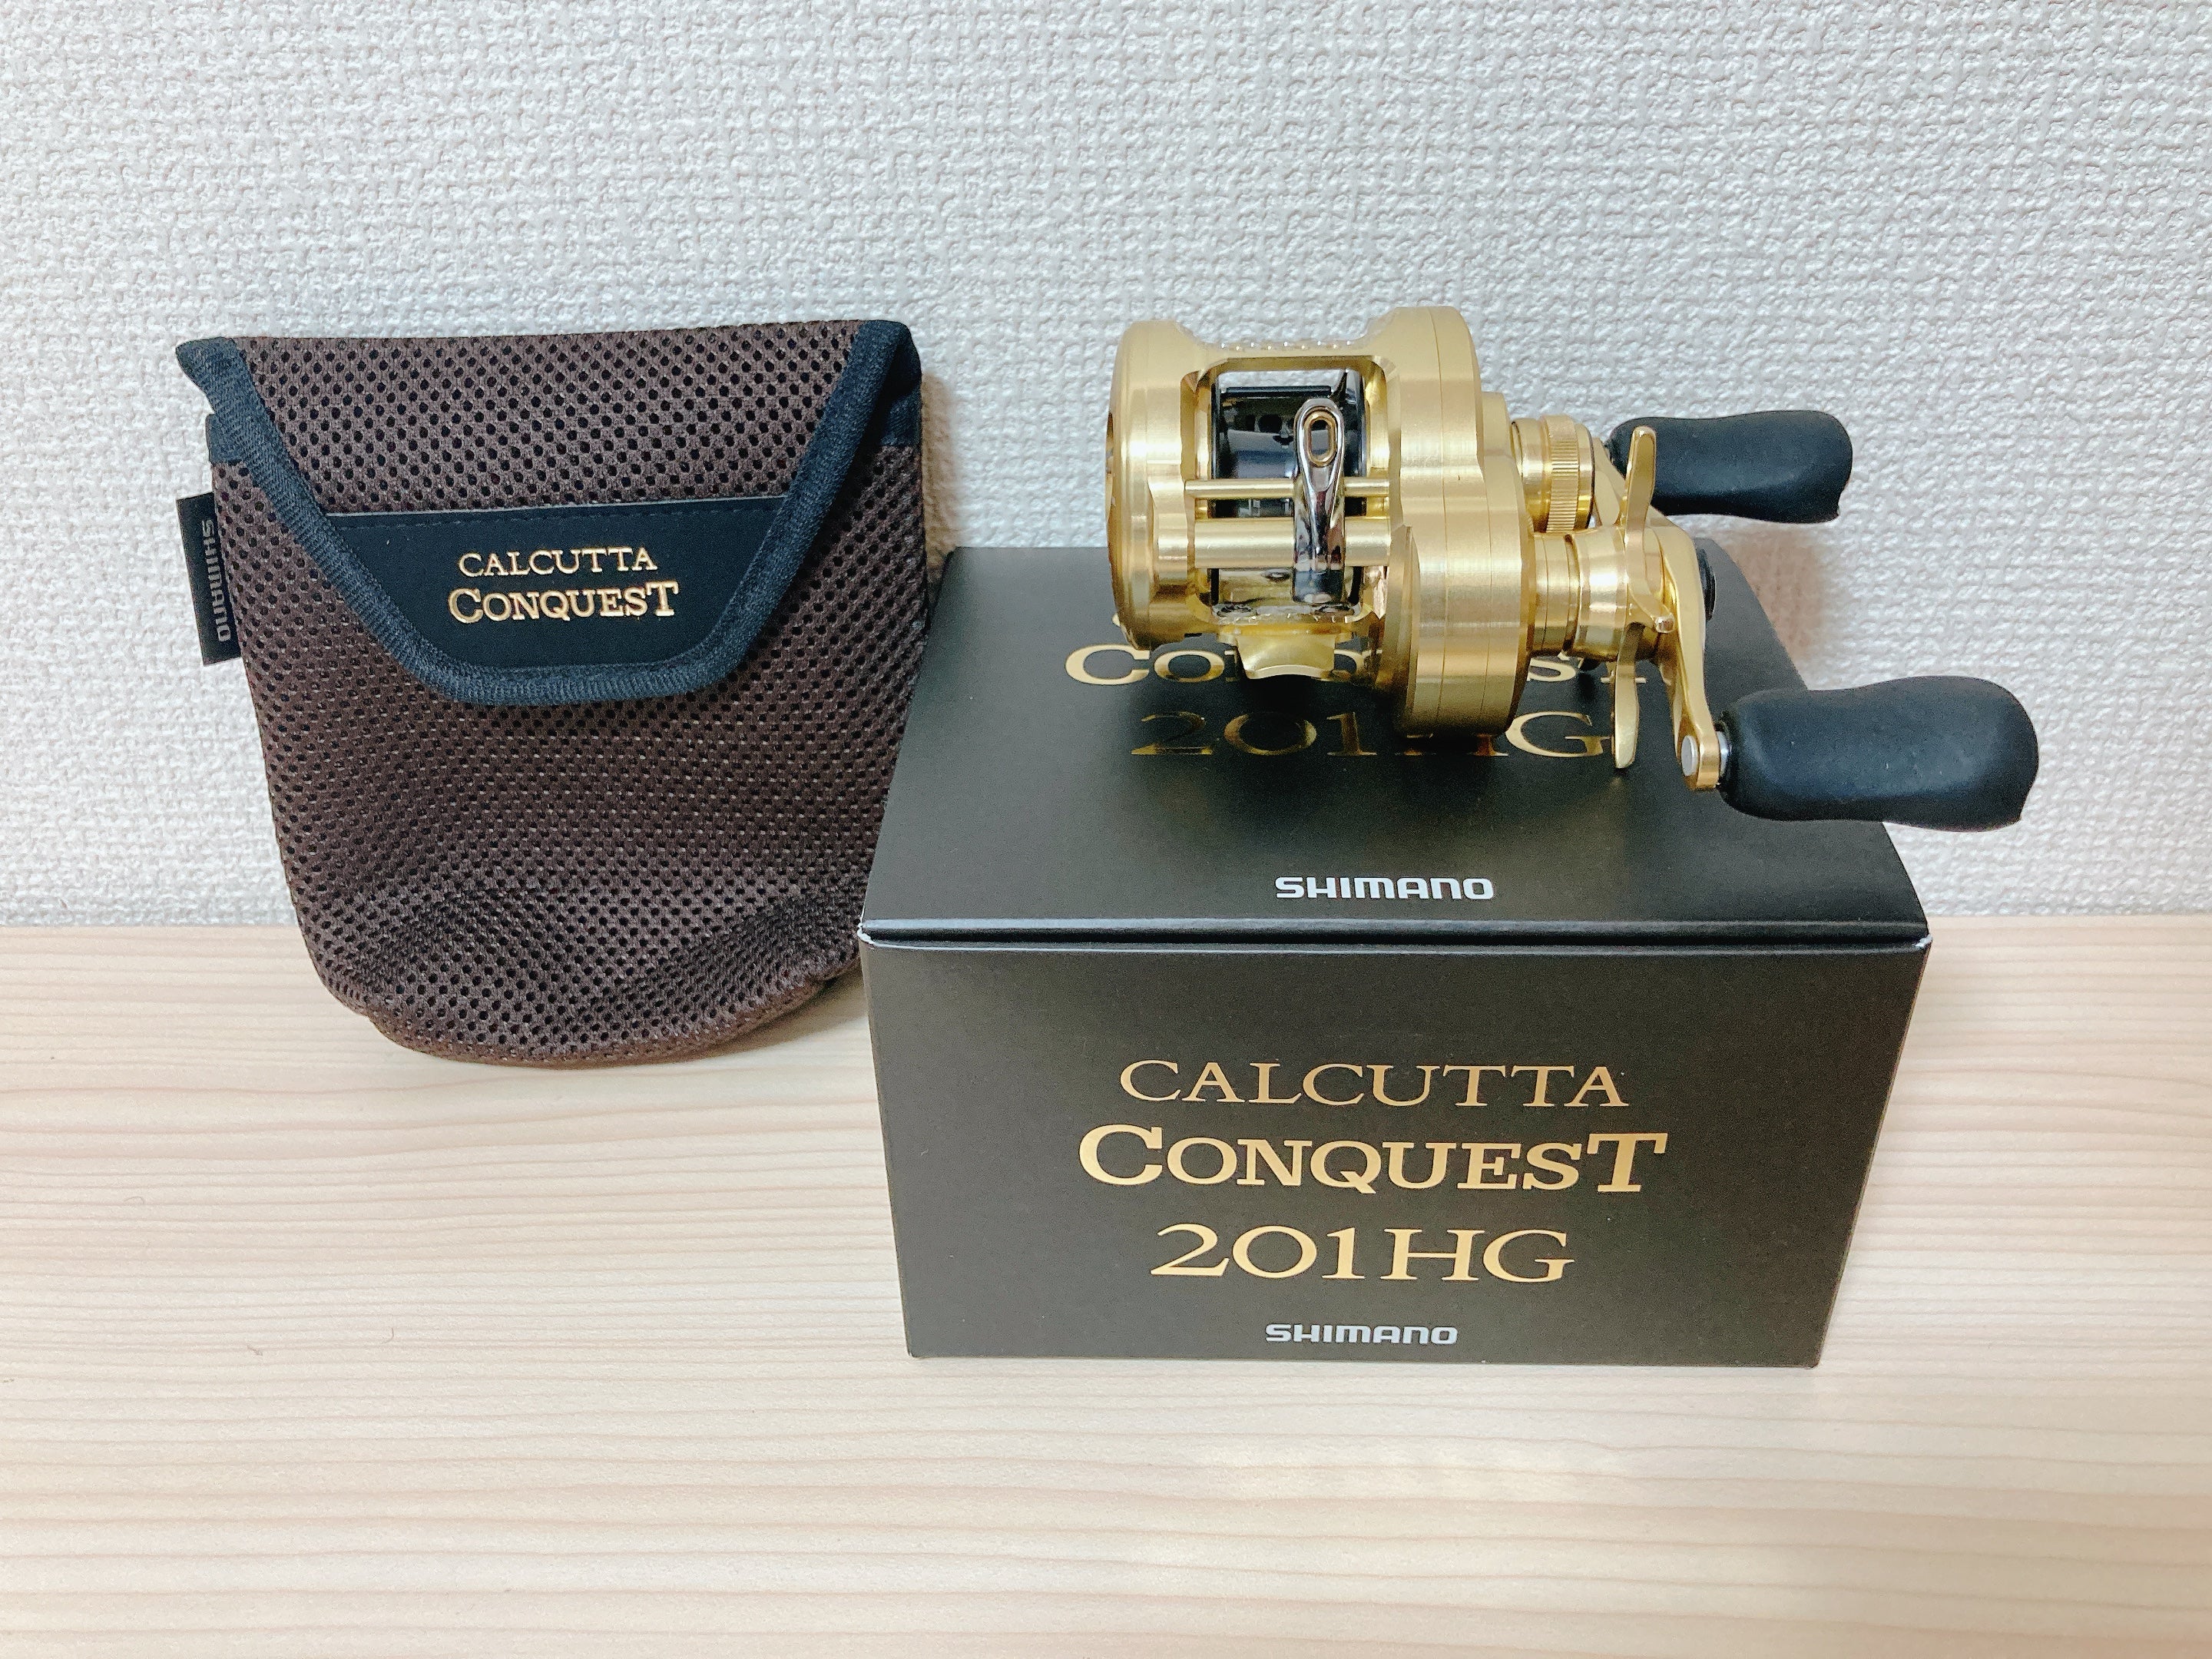 Shimano 23 Calcutta Conquest BFS Baitcasting Reel Various Size New in Box